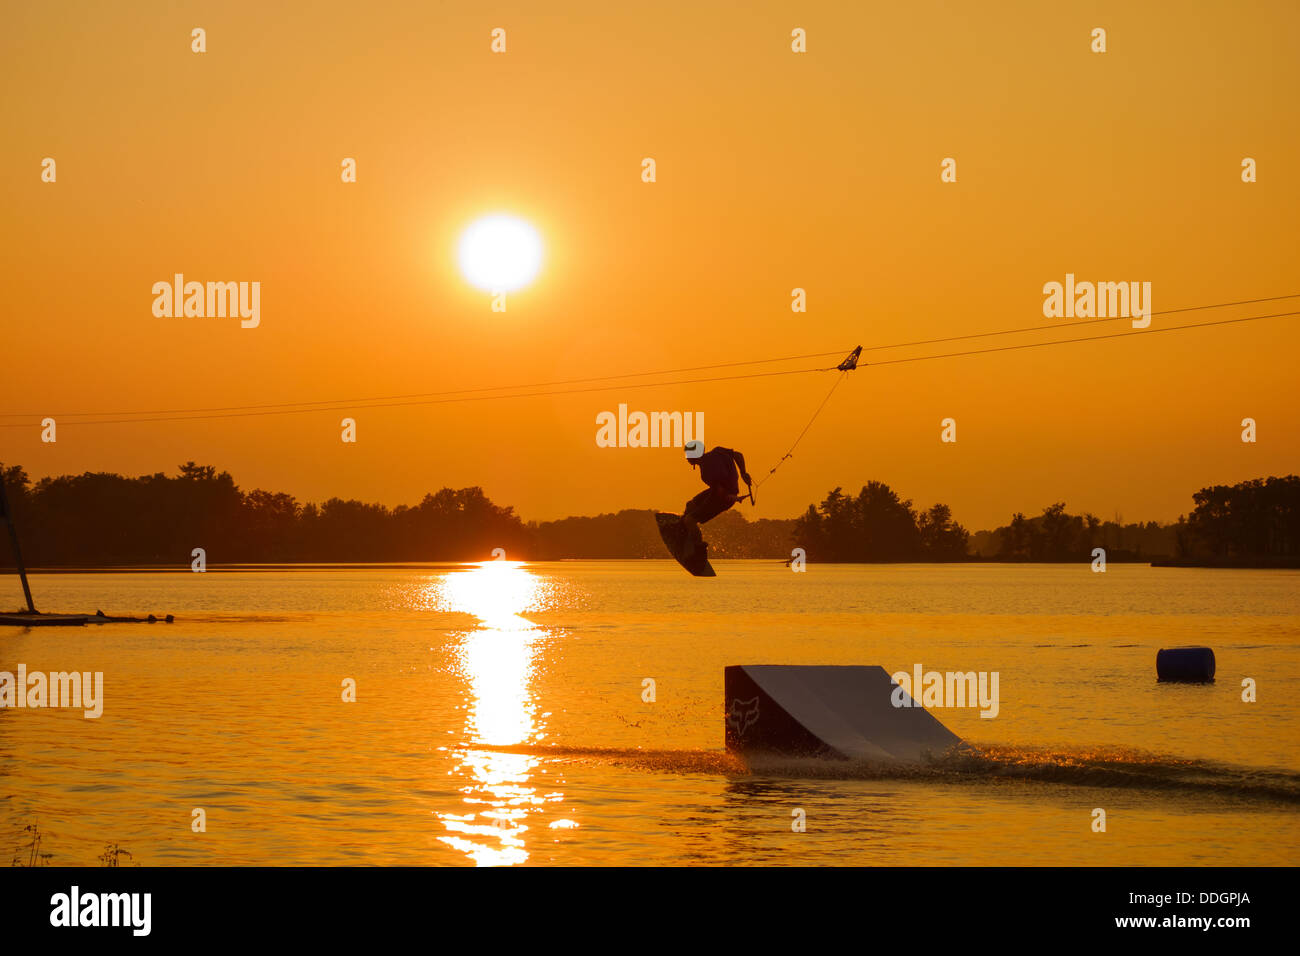 Silhouette of a man cable wakeboarding Stock Photo